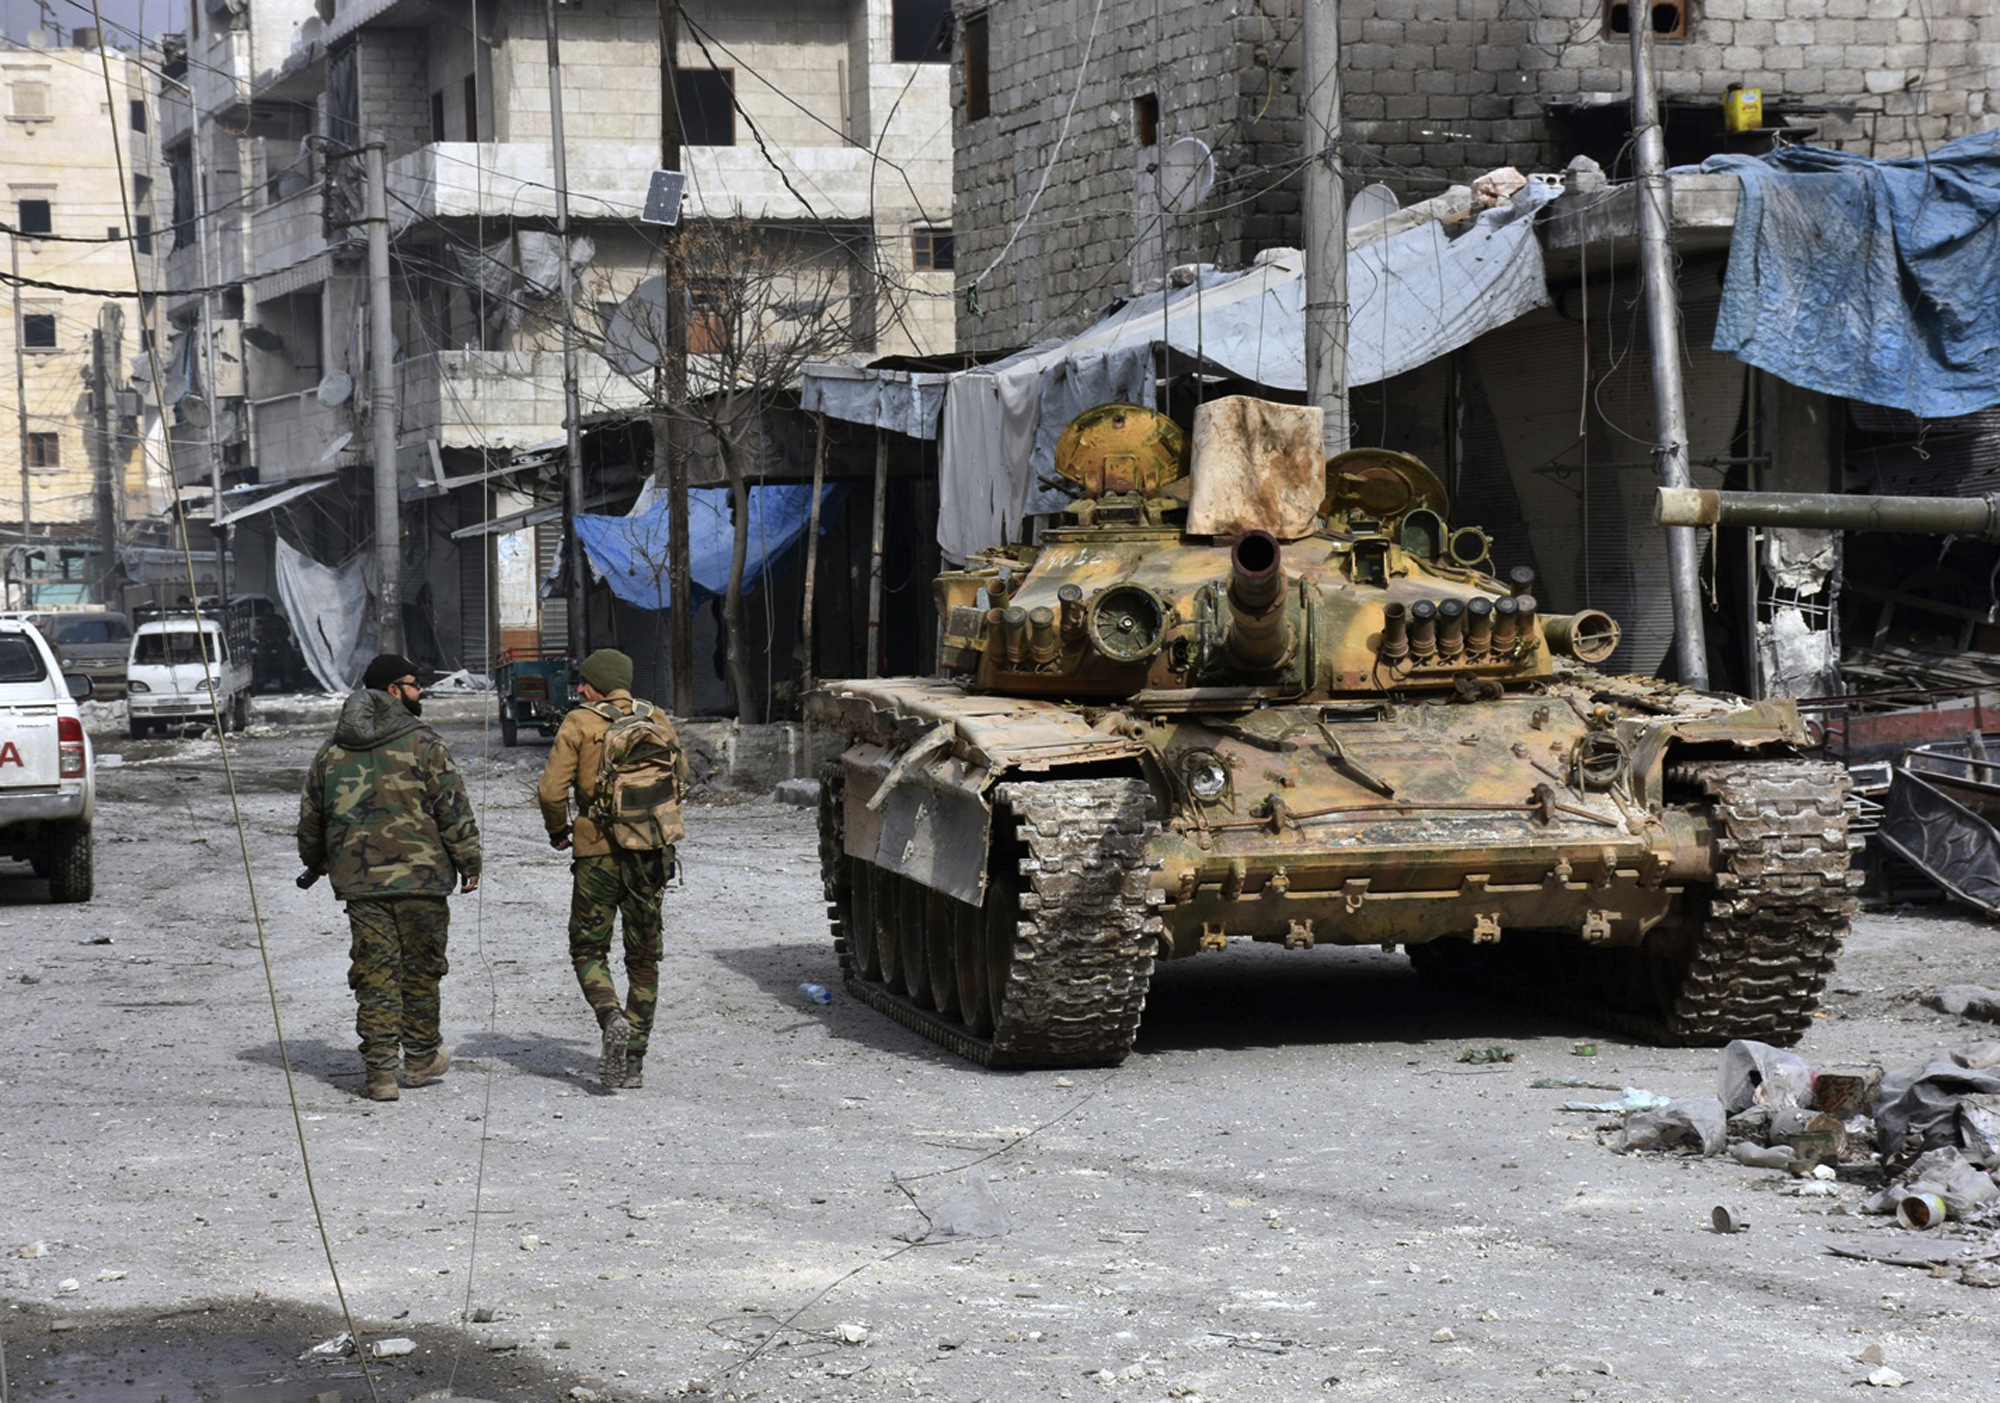 Syrian soldiers pass by a tank where government forces have captured wide areas in eastern Aleppo (SANA via AP)